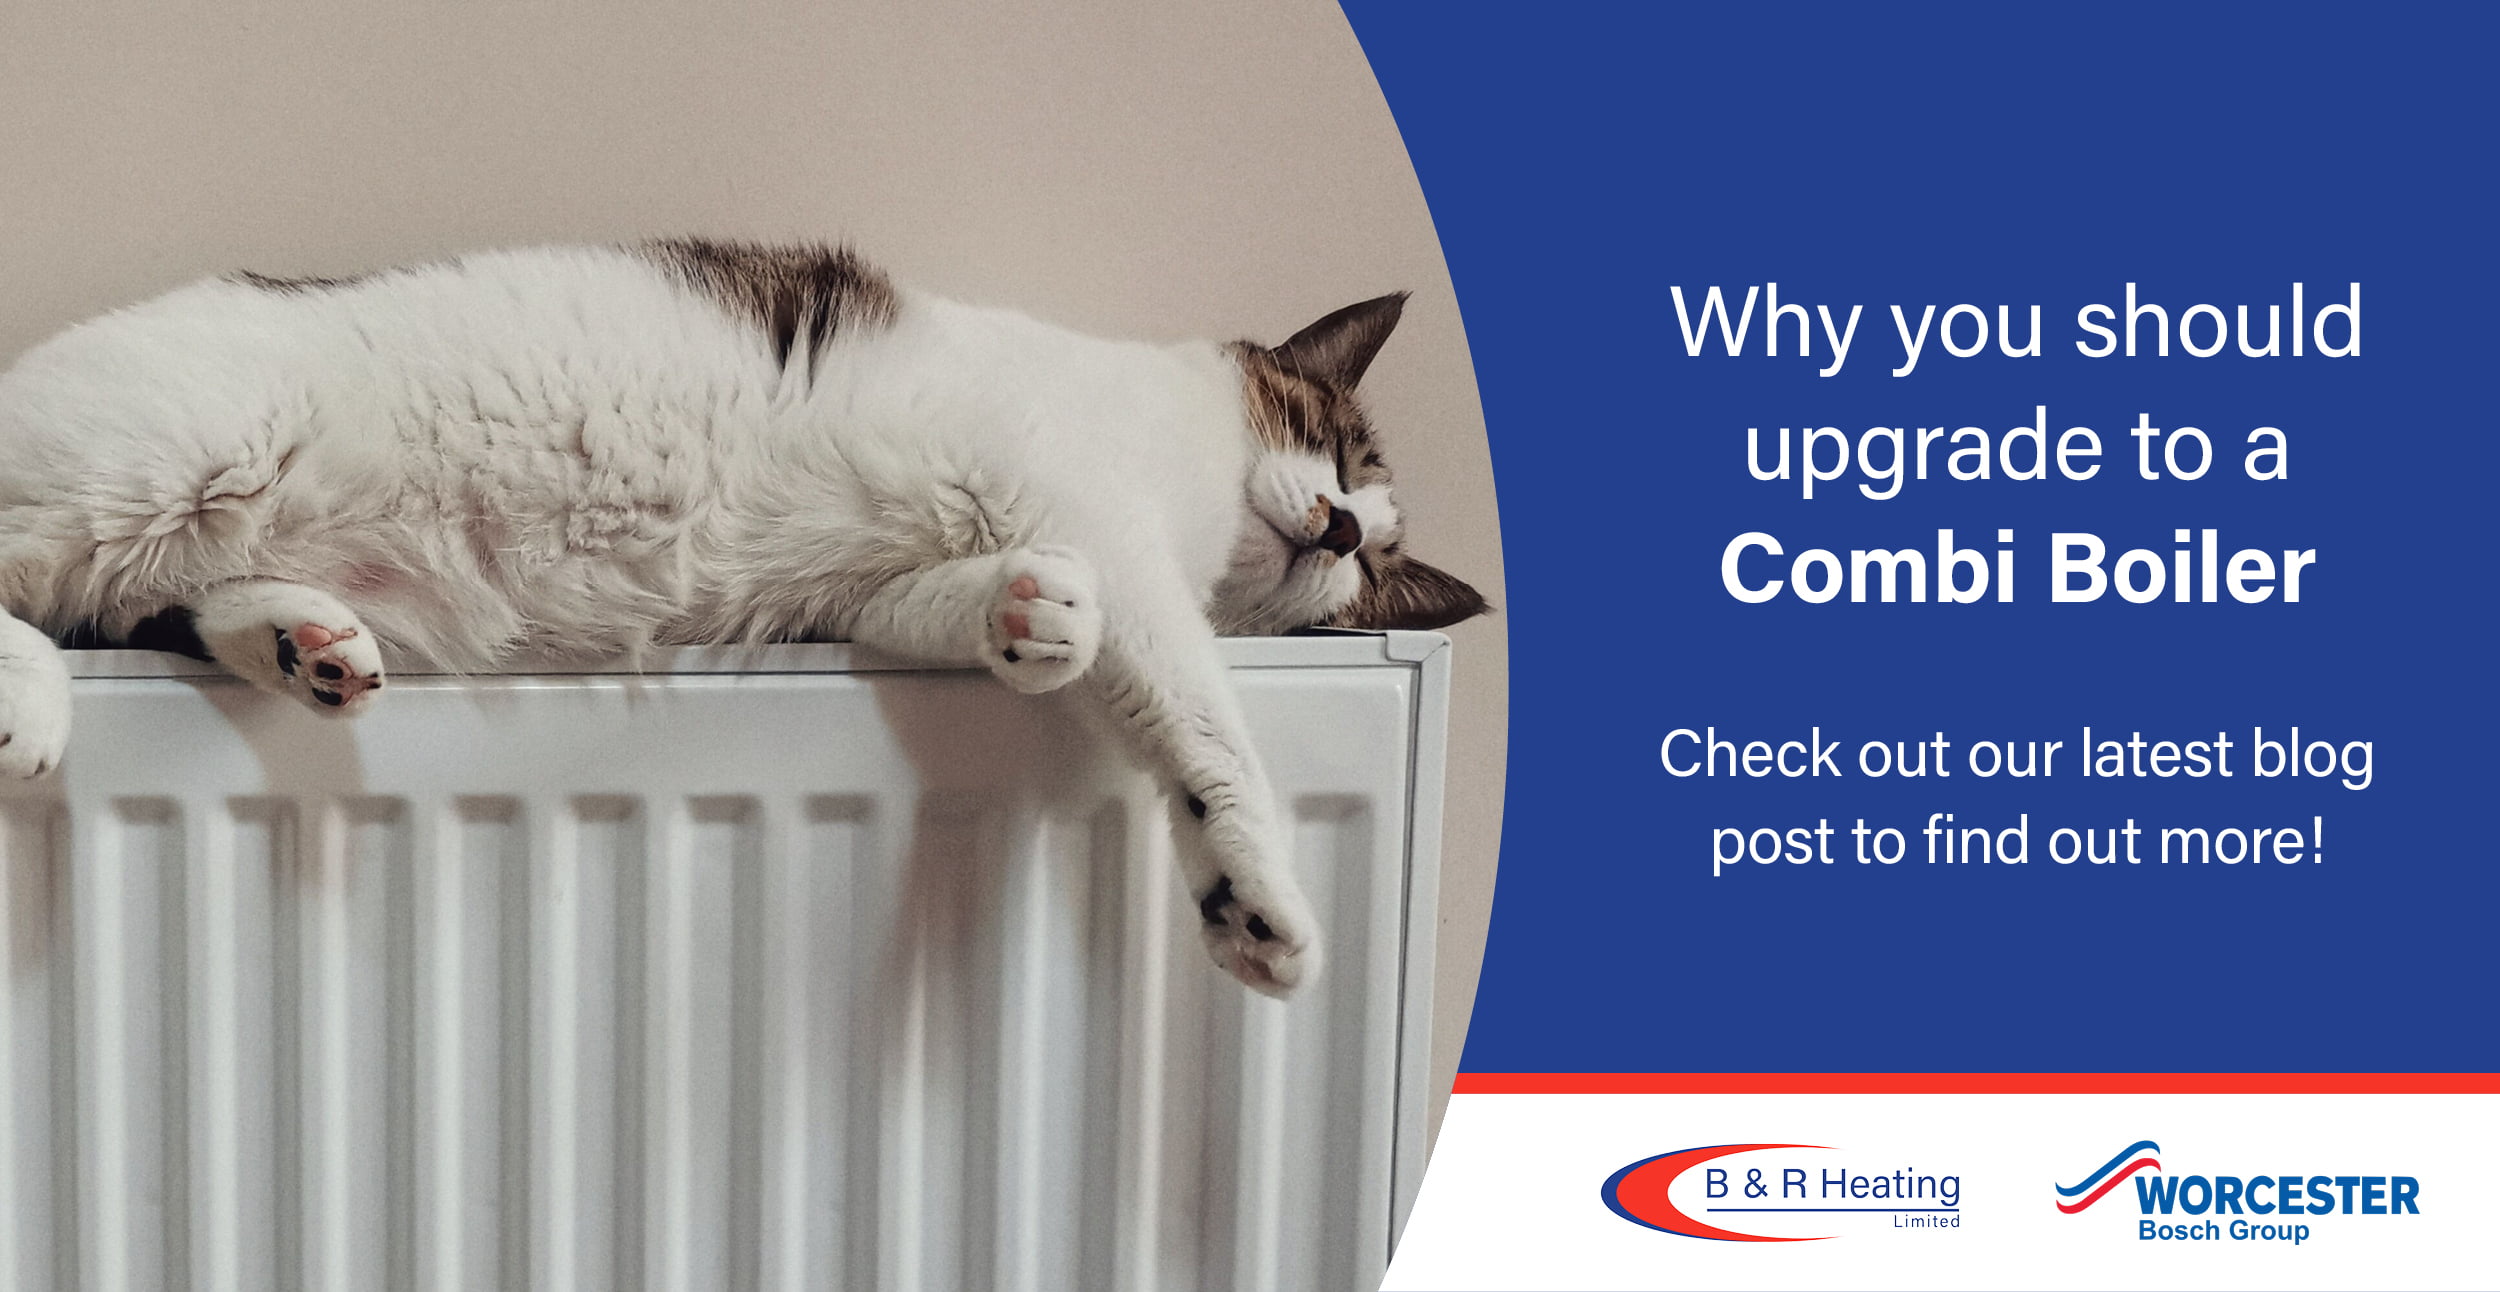 Why should you upgrade to a combi boiler blog post by B&R Heating Ltd